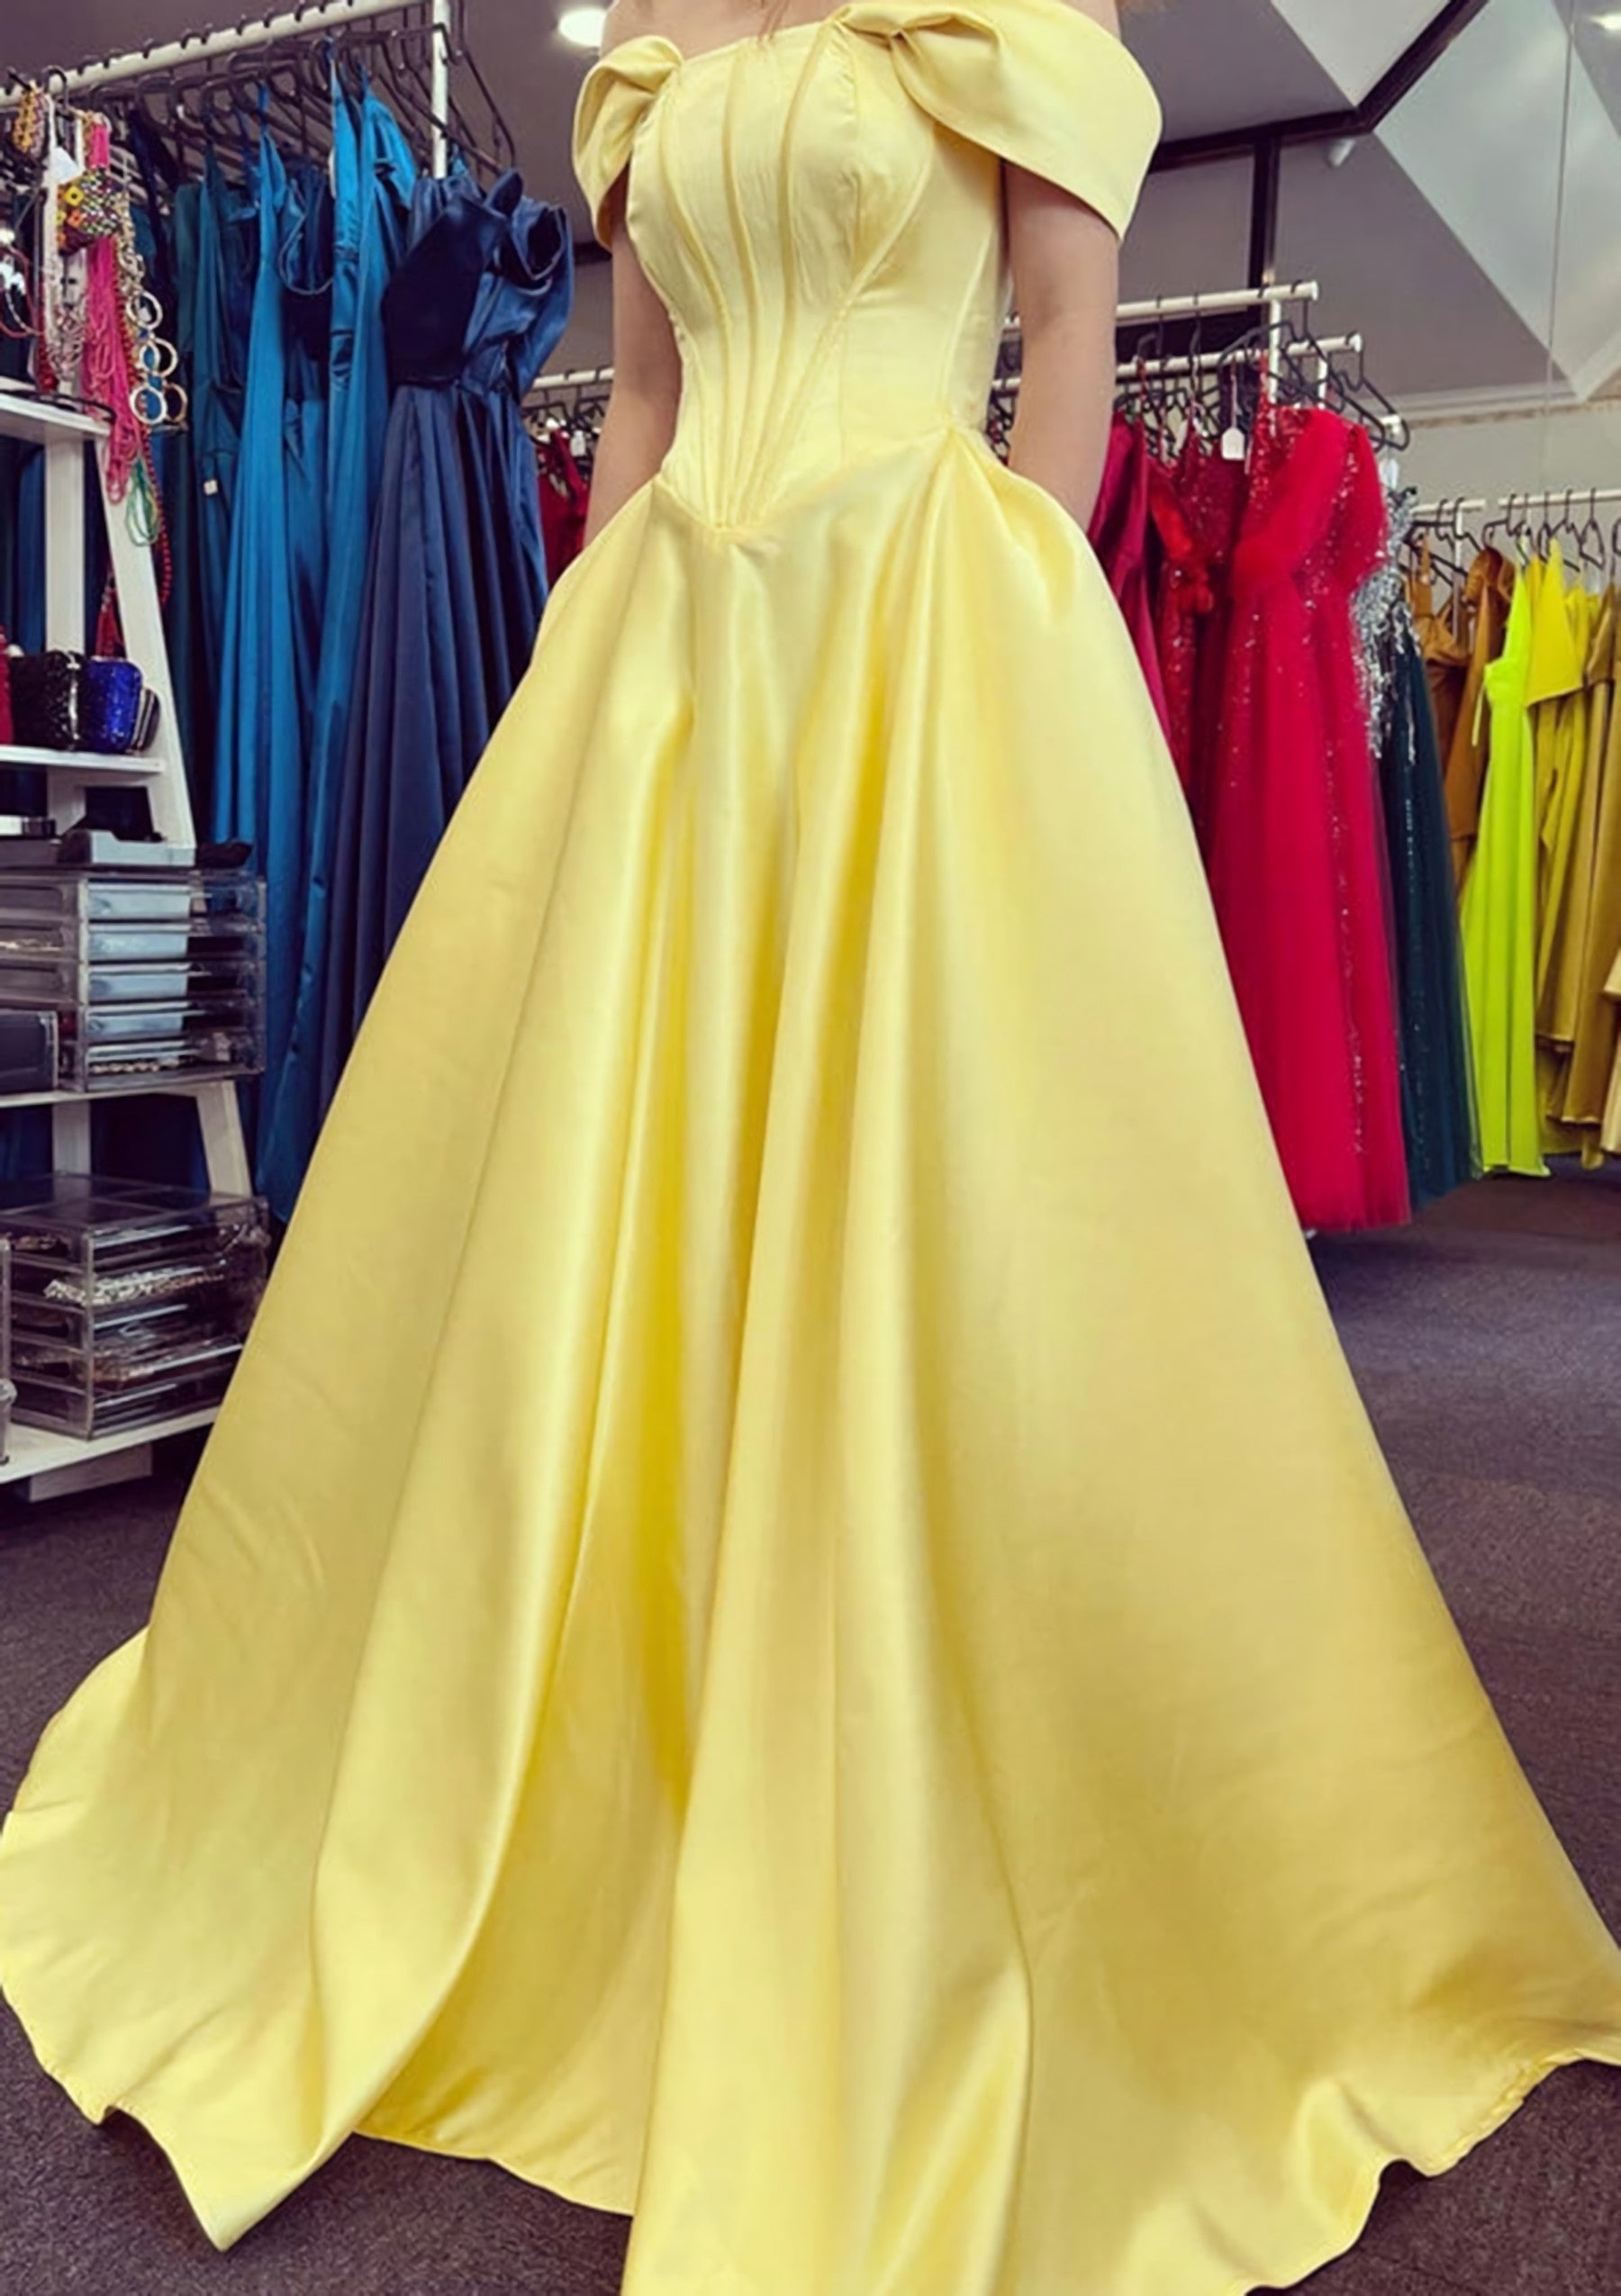 A Line Off The Shoulder Strapless Long Floor Length Satin Prom Dress Outfits For Women With Pleated Pockets